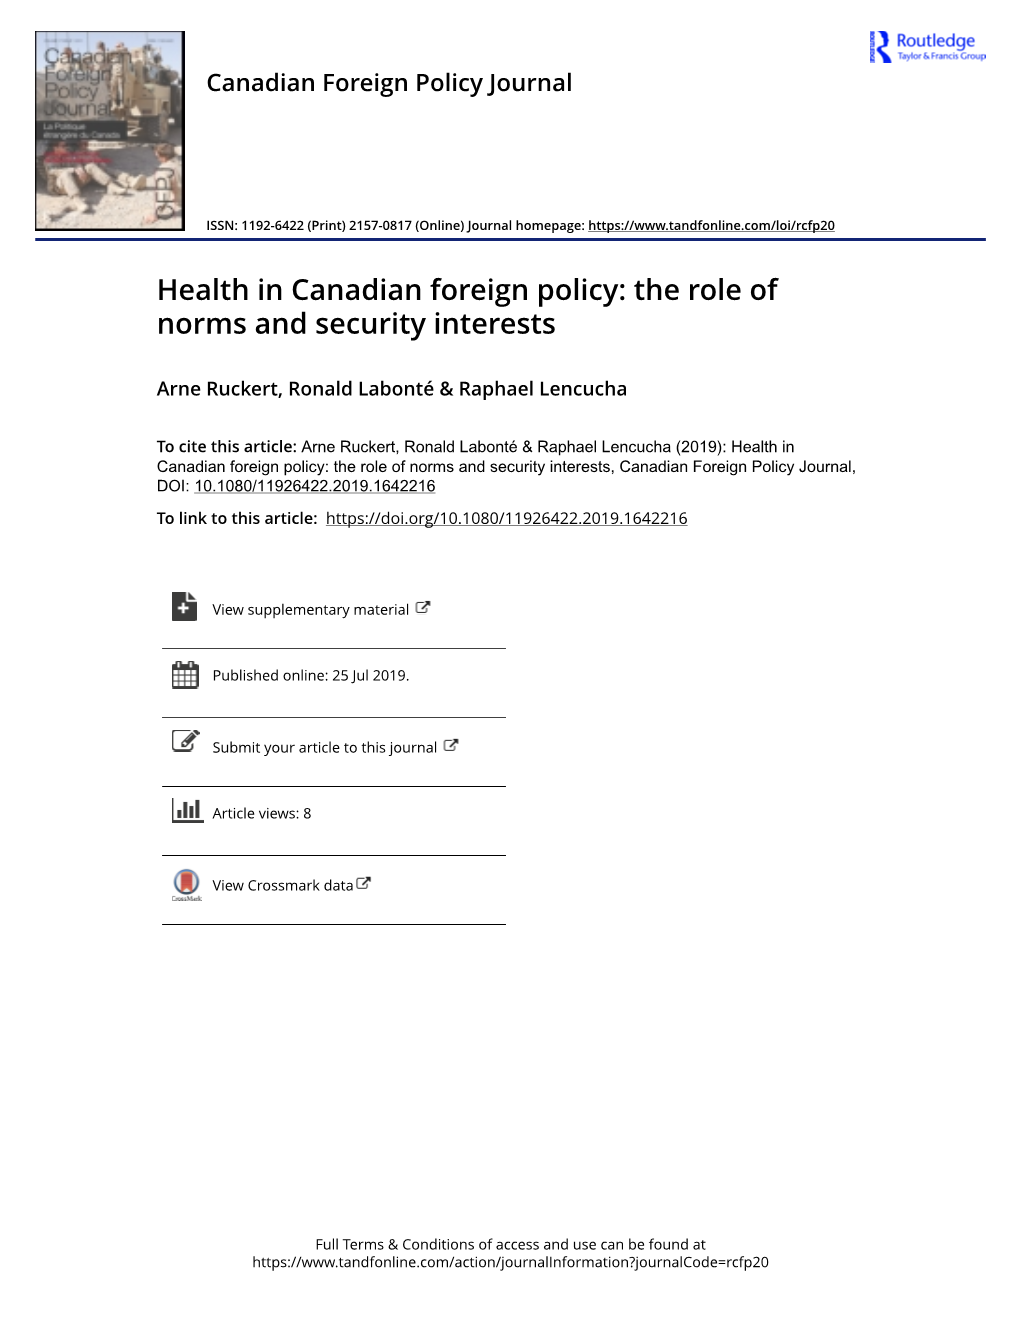 Health in Canadian Foreign Policy: the Role of Norms and Security Interests